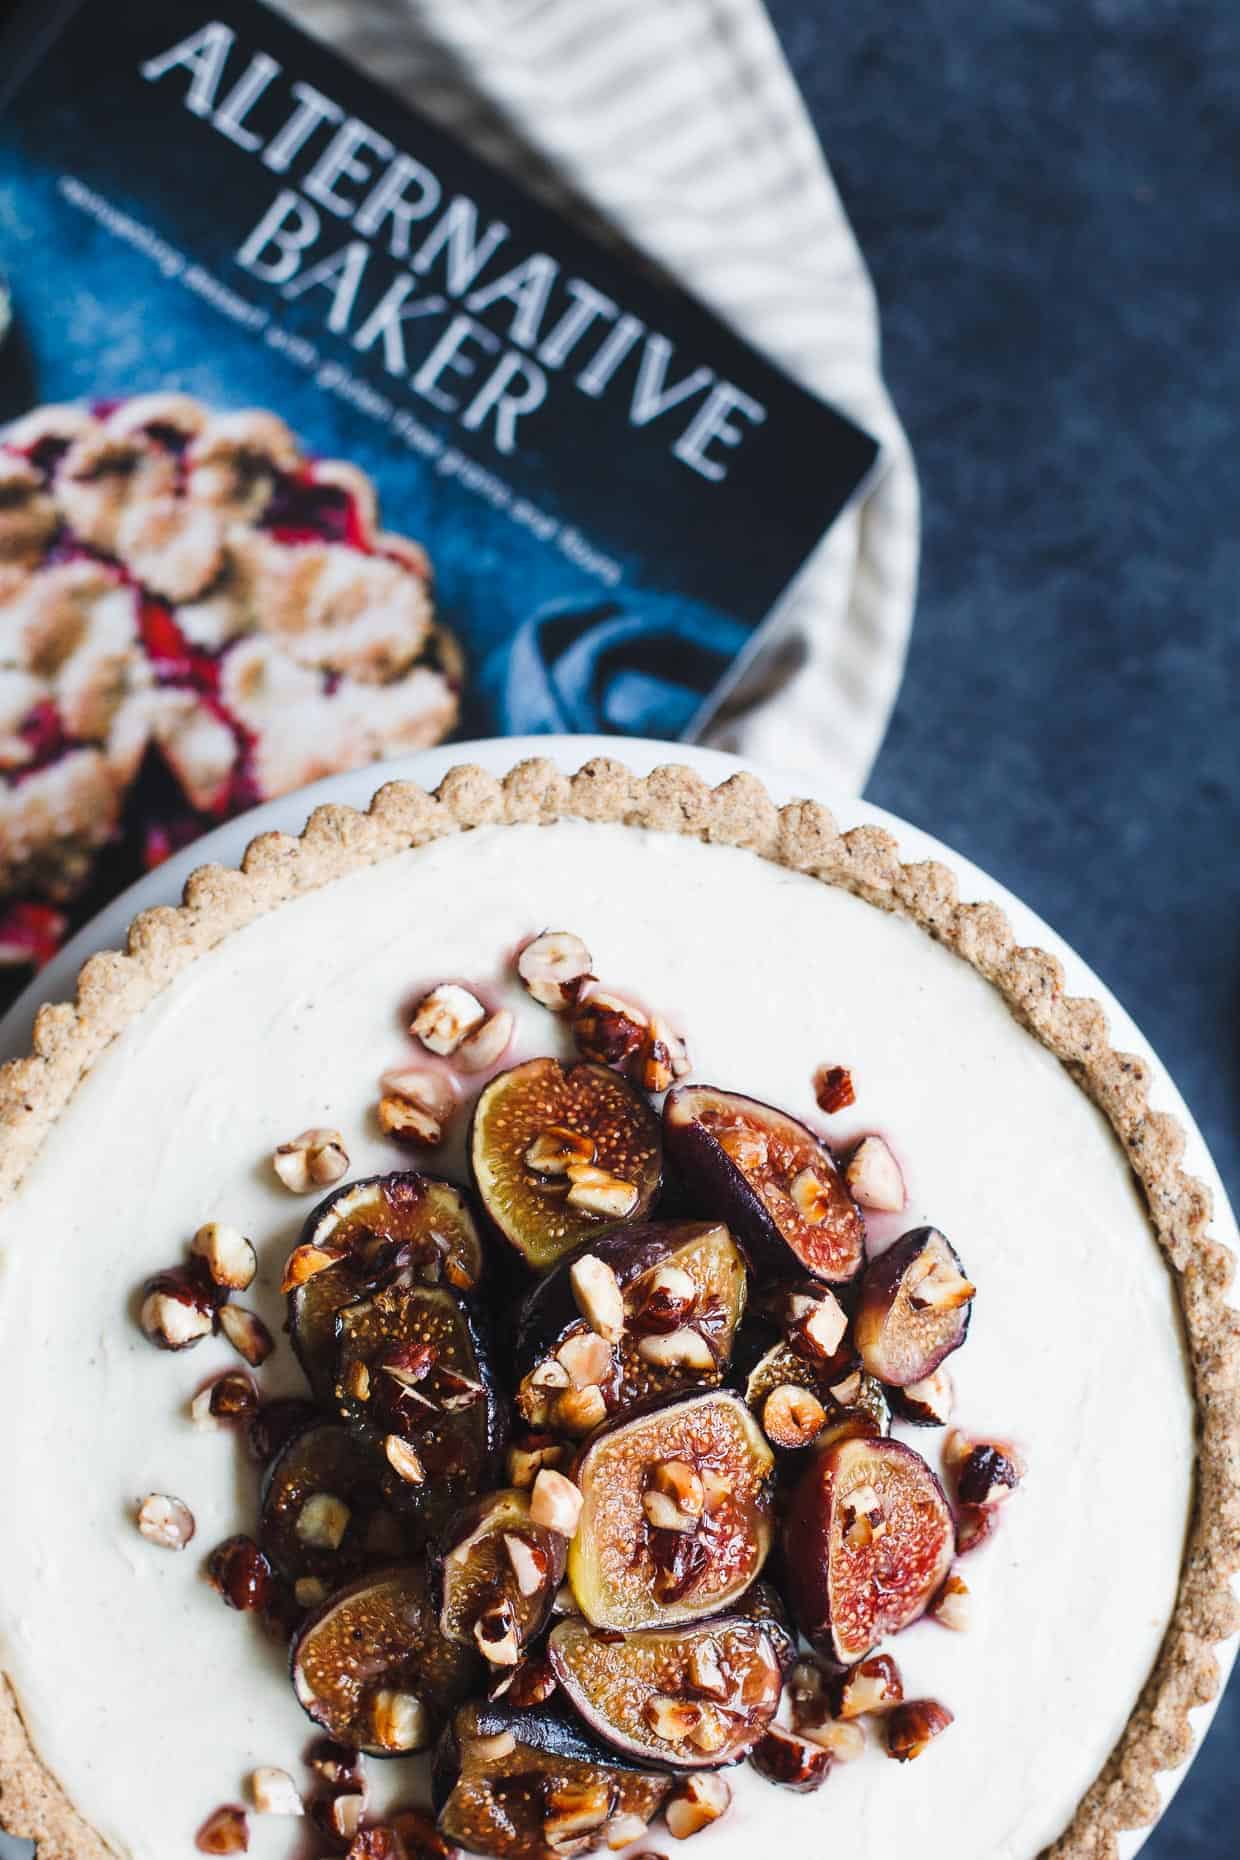 Ginger Goat Cheese Cheesecake with Roasted Figs and Hazelnuts